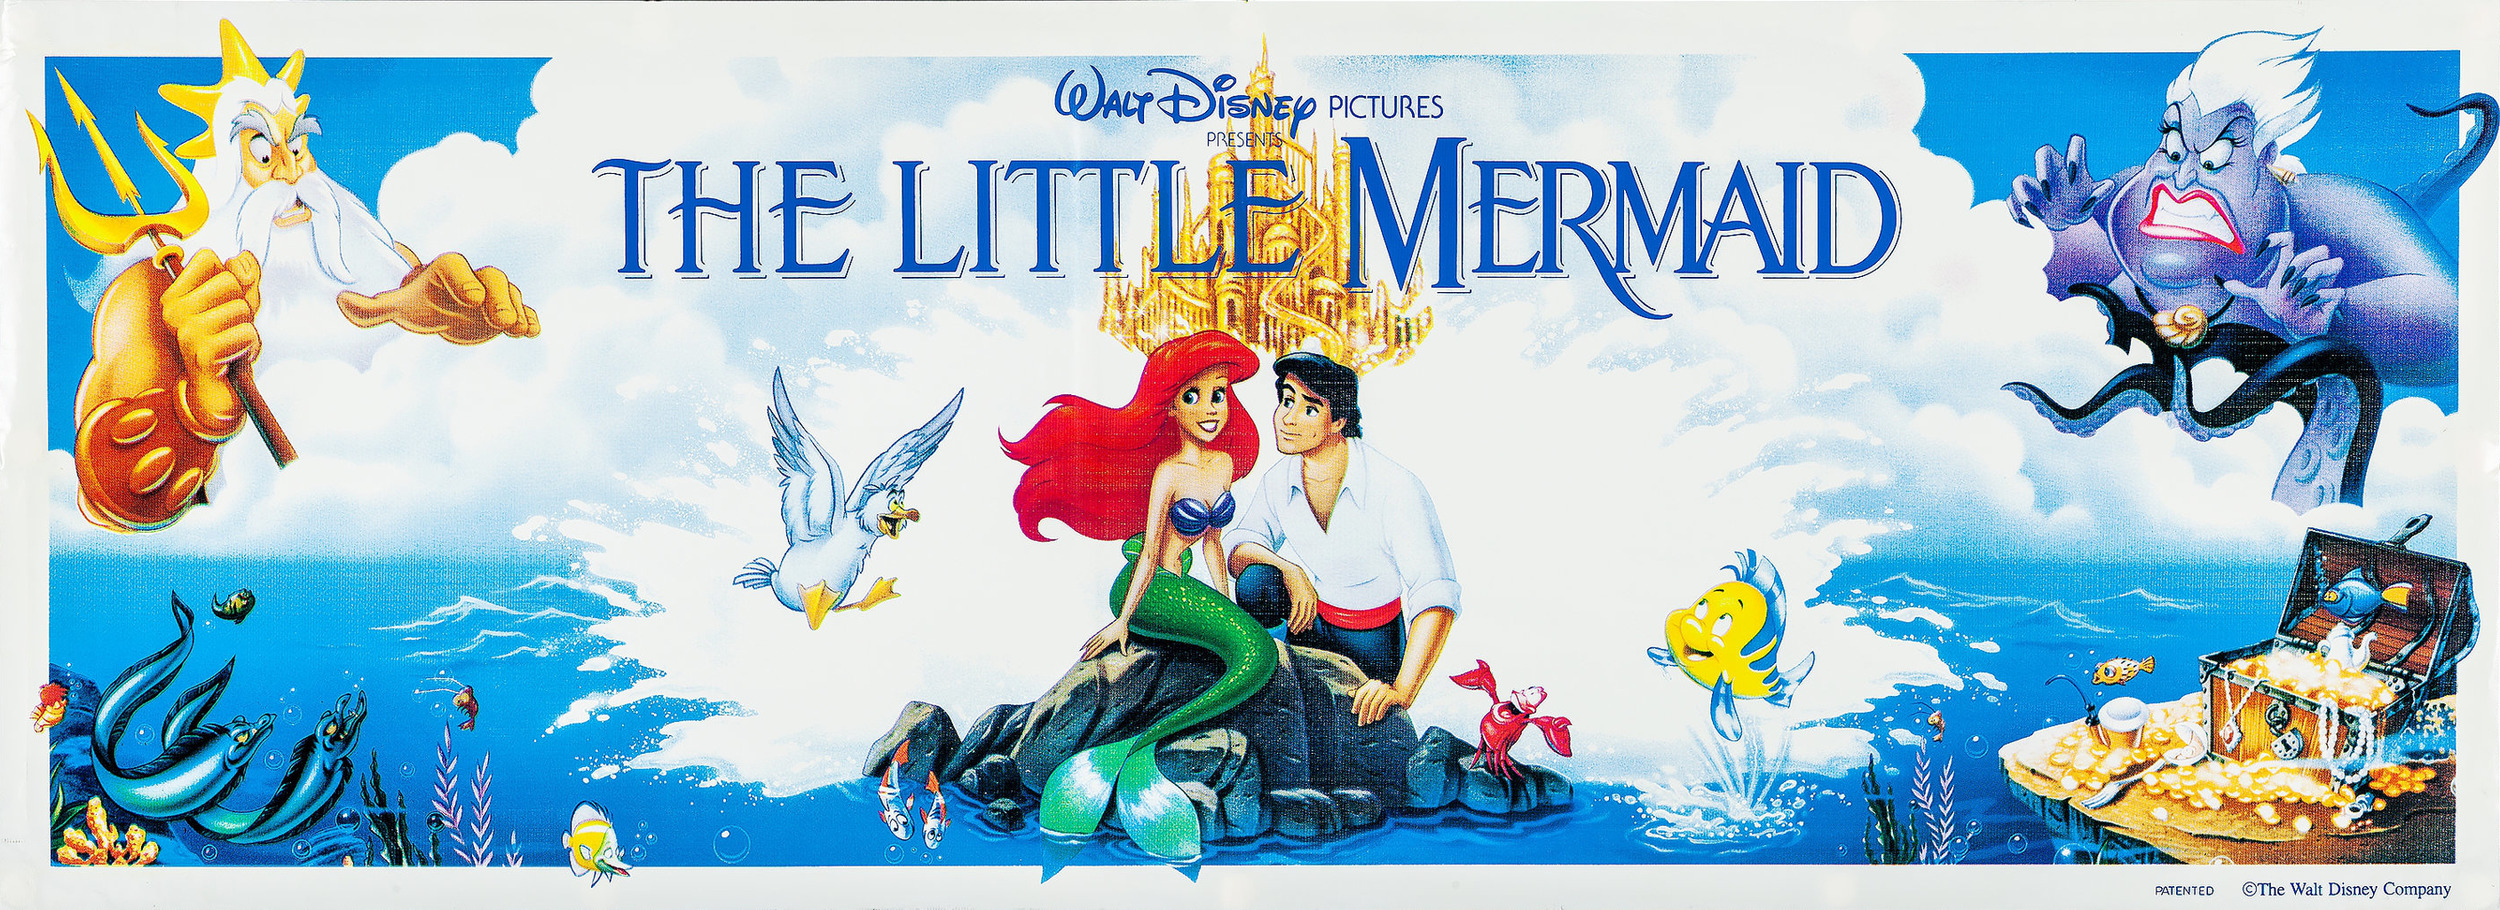 Mega Sized Movie Poster Image for The Little Mermaid (#7 of 10)